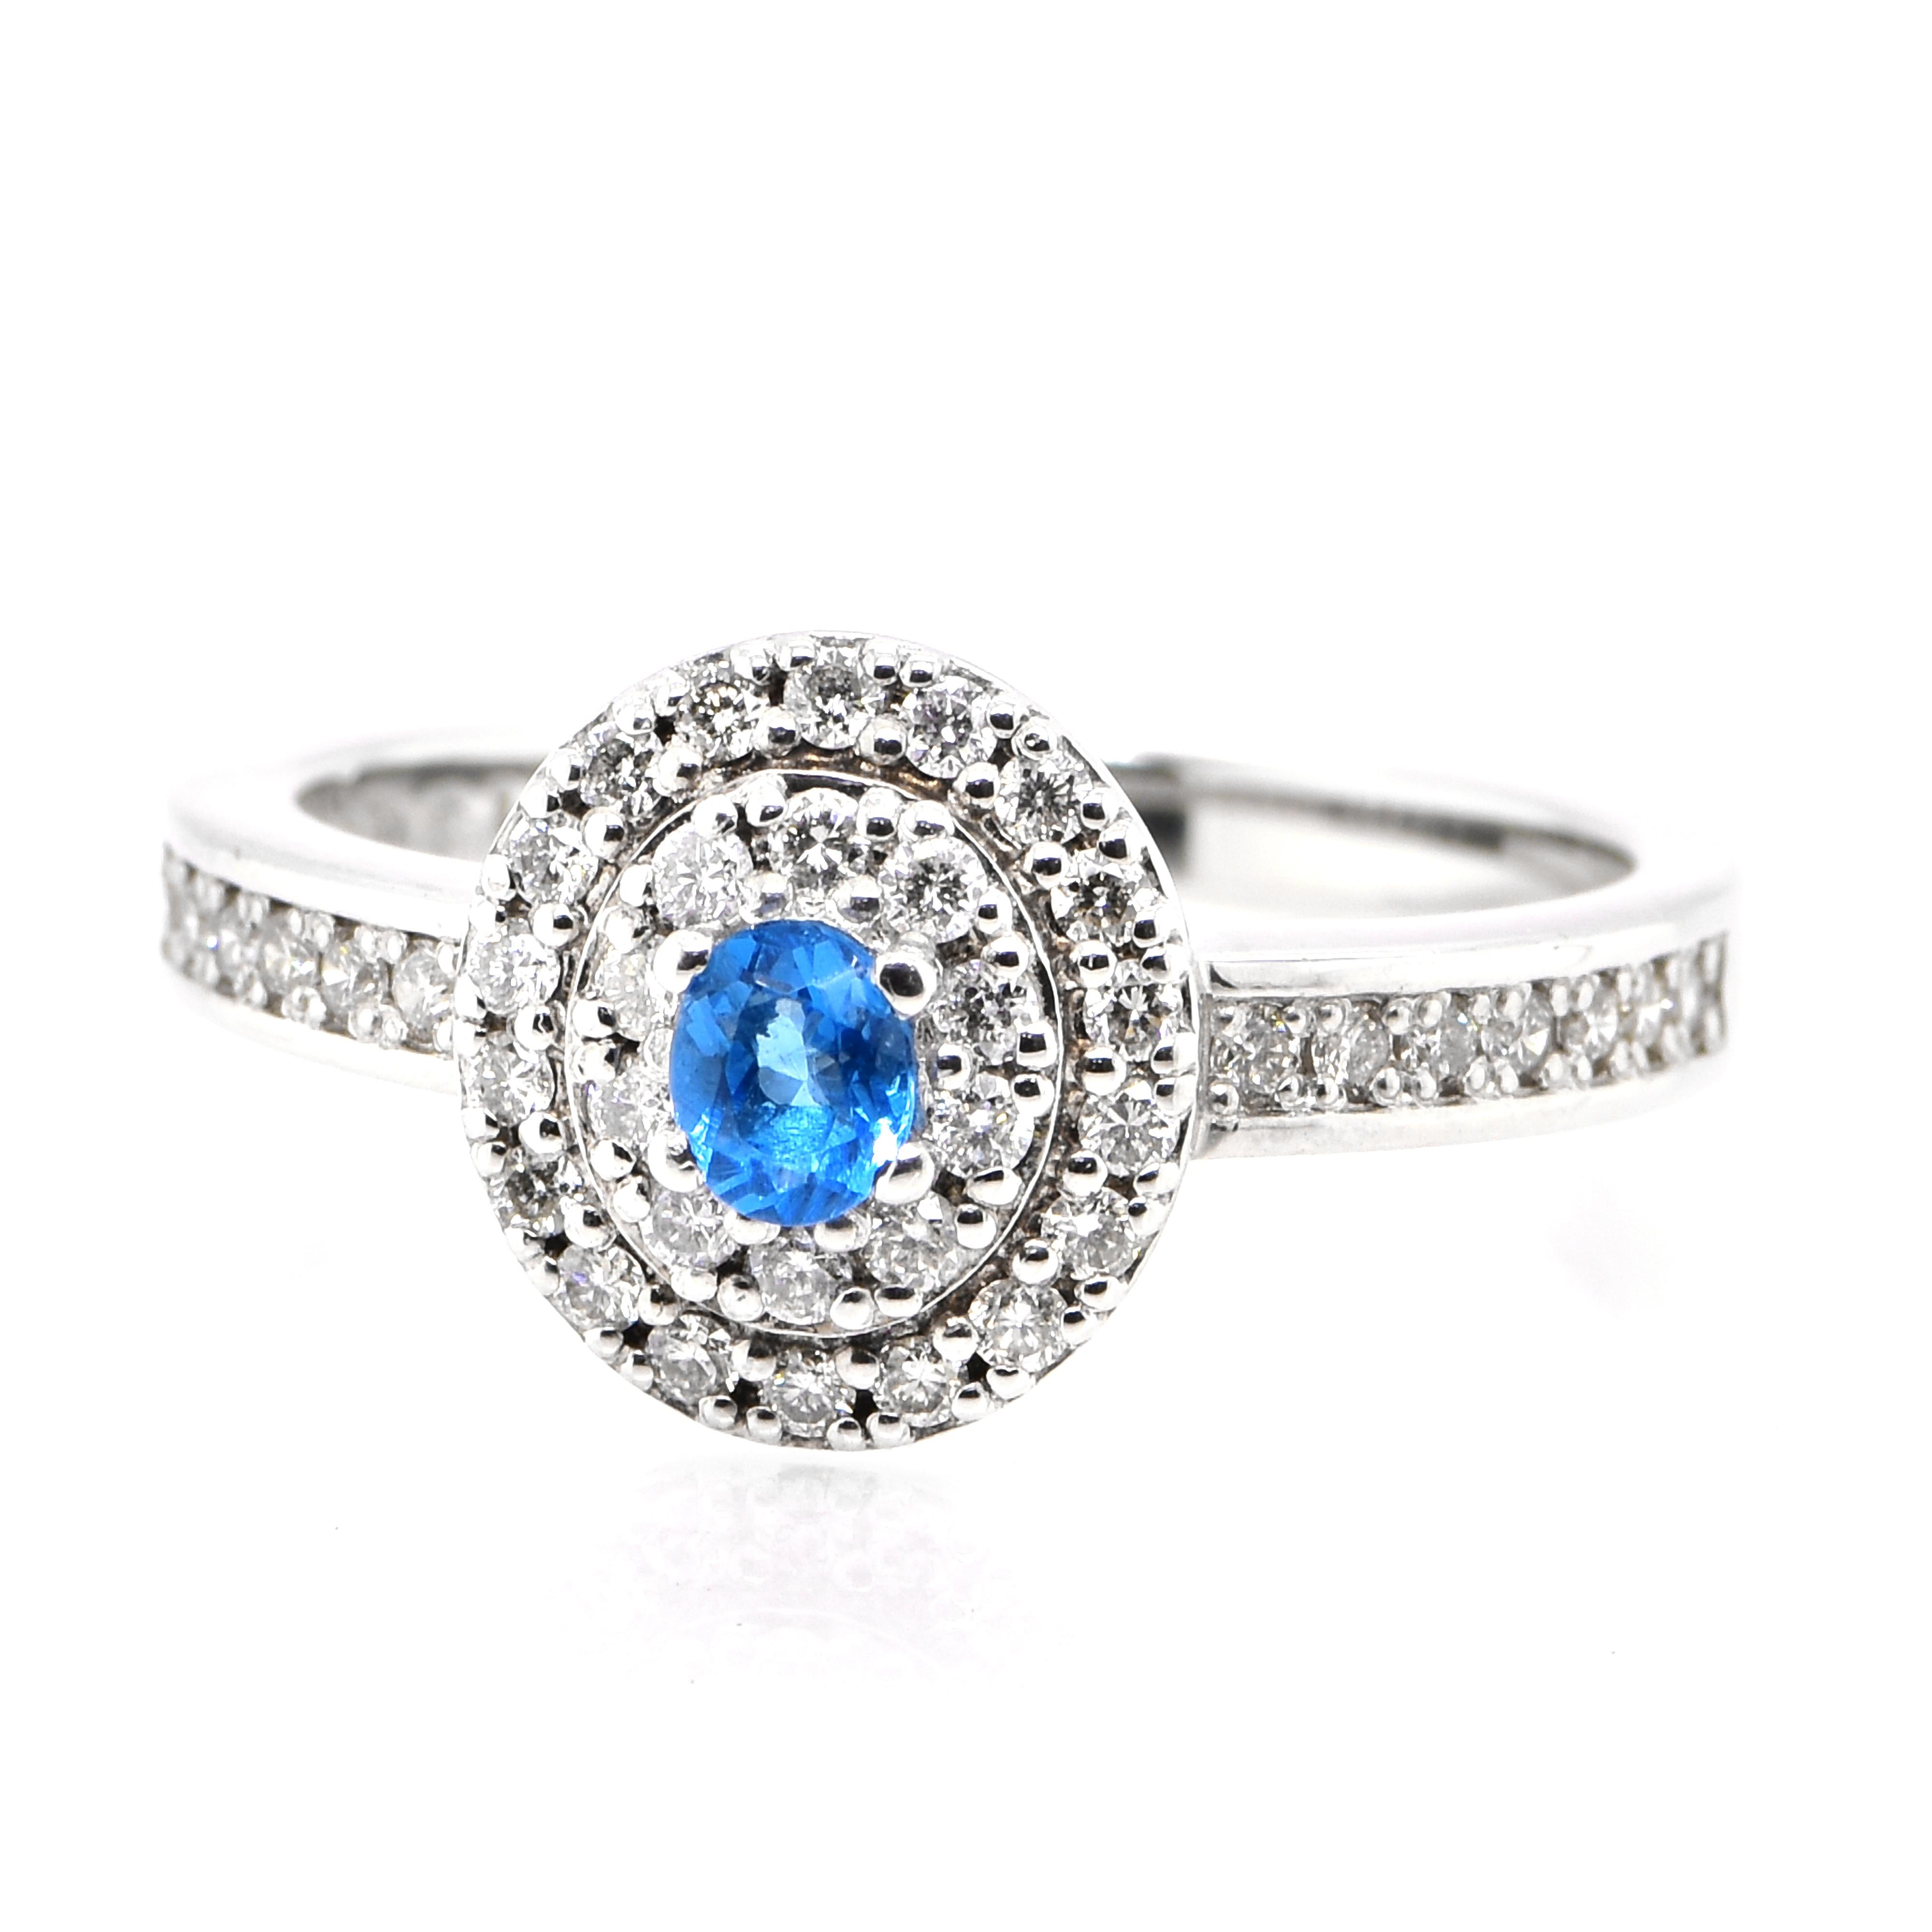 A stunning Engagement Ring featuring a 0.13 Carat Hauynite/Hauyne and 0.34 Carats of Diamond Accents set in Platinum. Hauynite is an extremely rare mineral and even rarer gemstone. Its bright blue color is common for this gemstone, but is can be